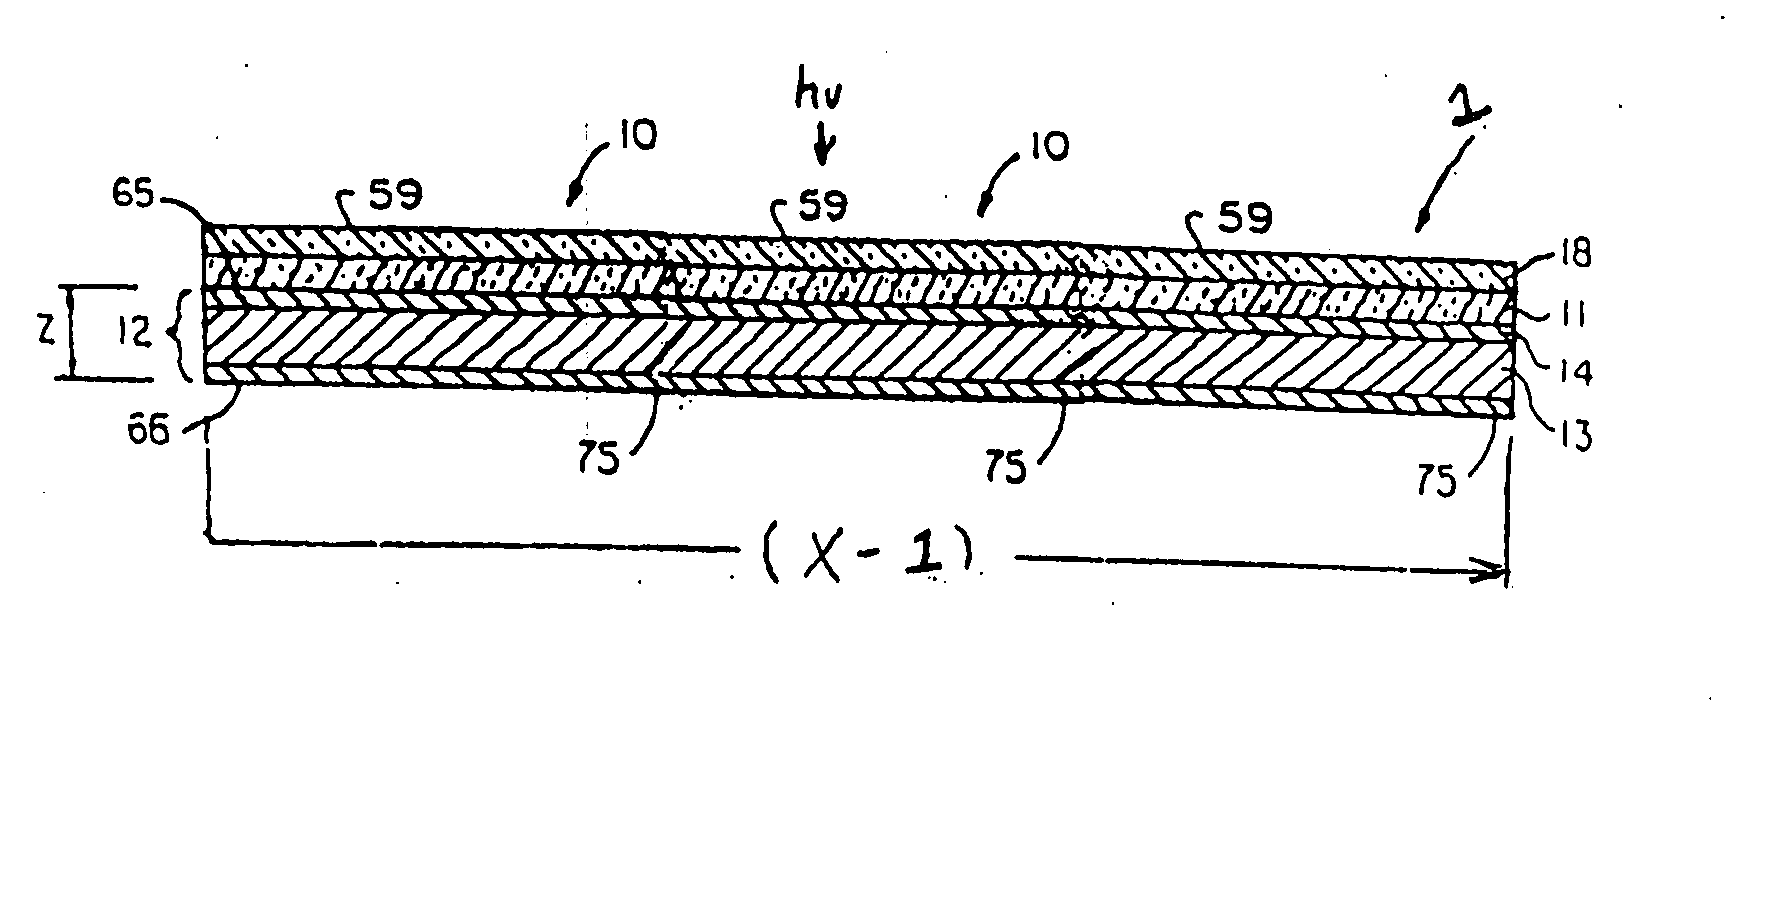 Collector grid, electrode structures and interconnect structures for photovoltaic arrays and other optoelectric devices